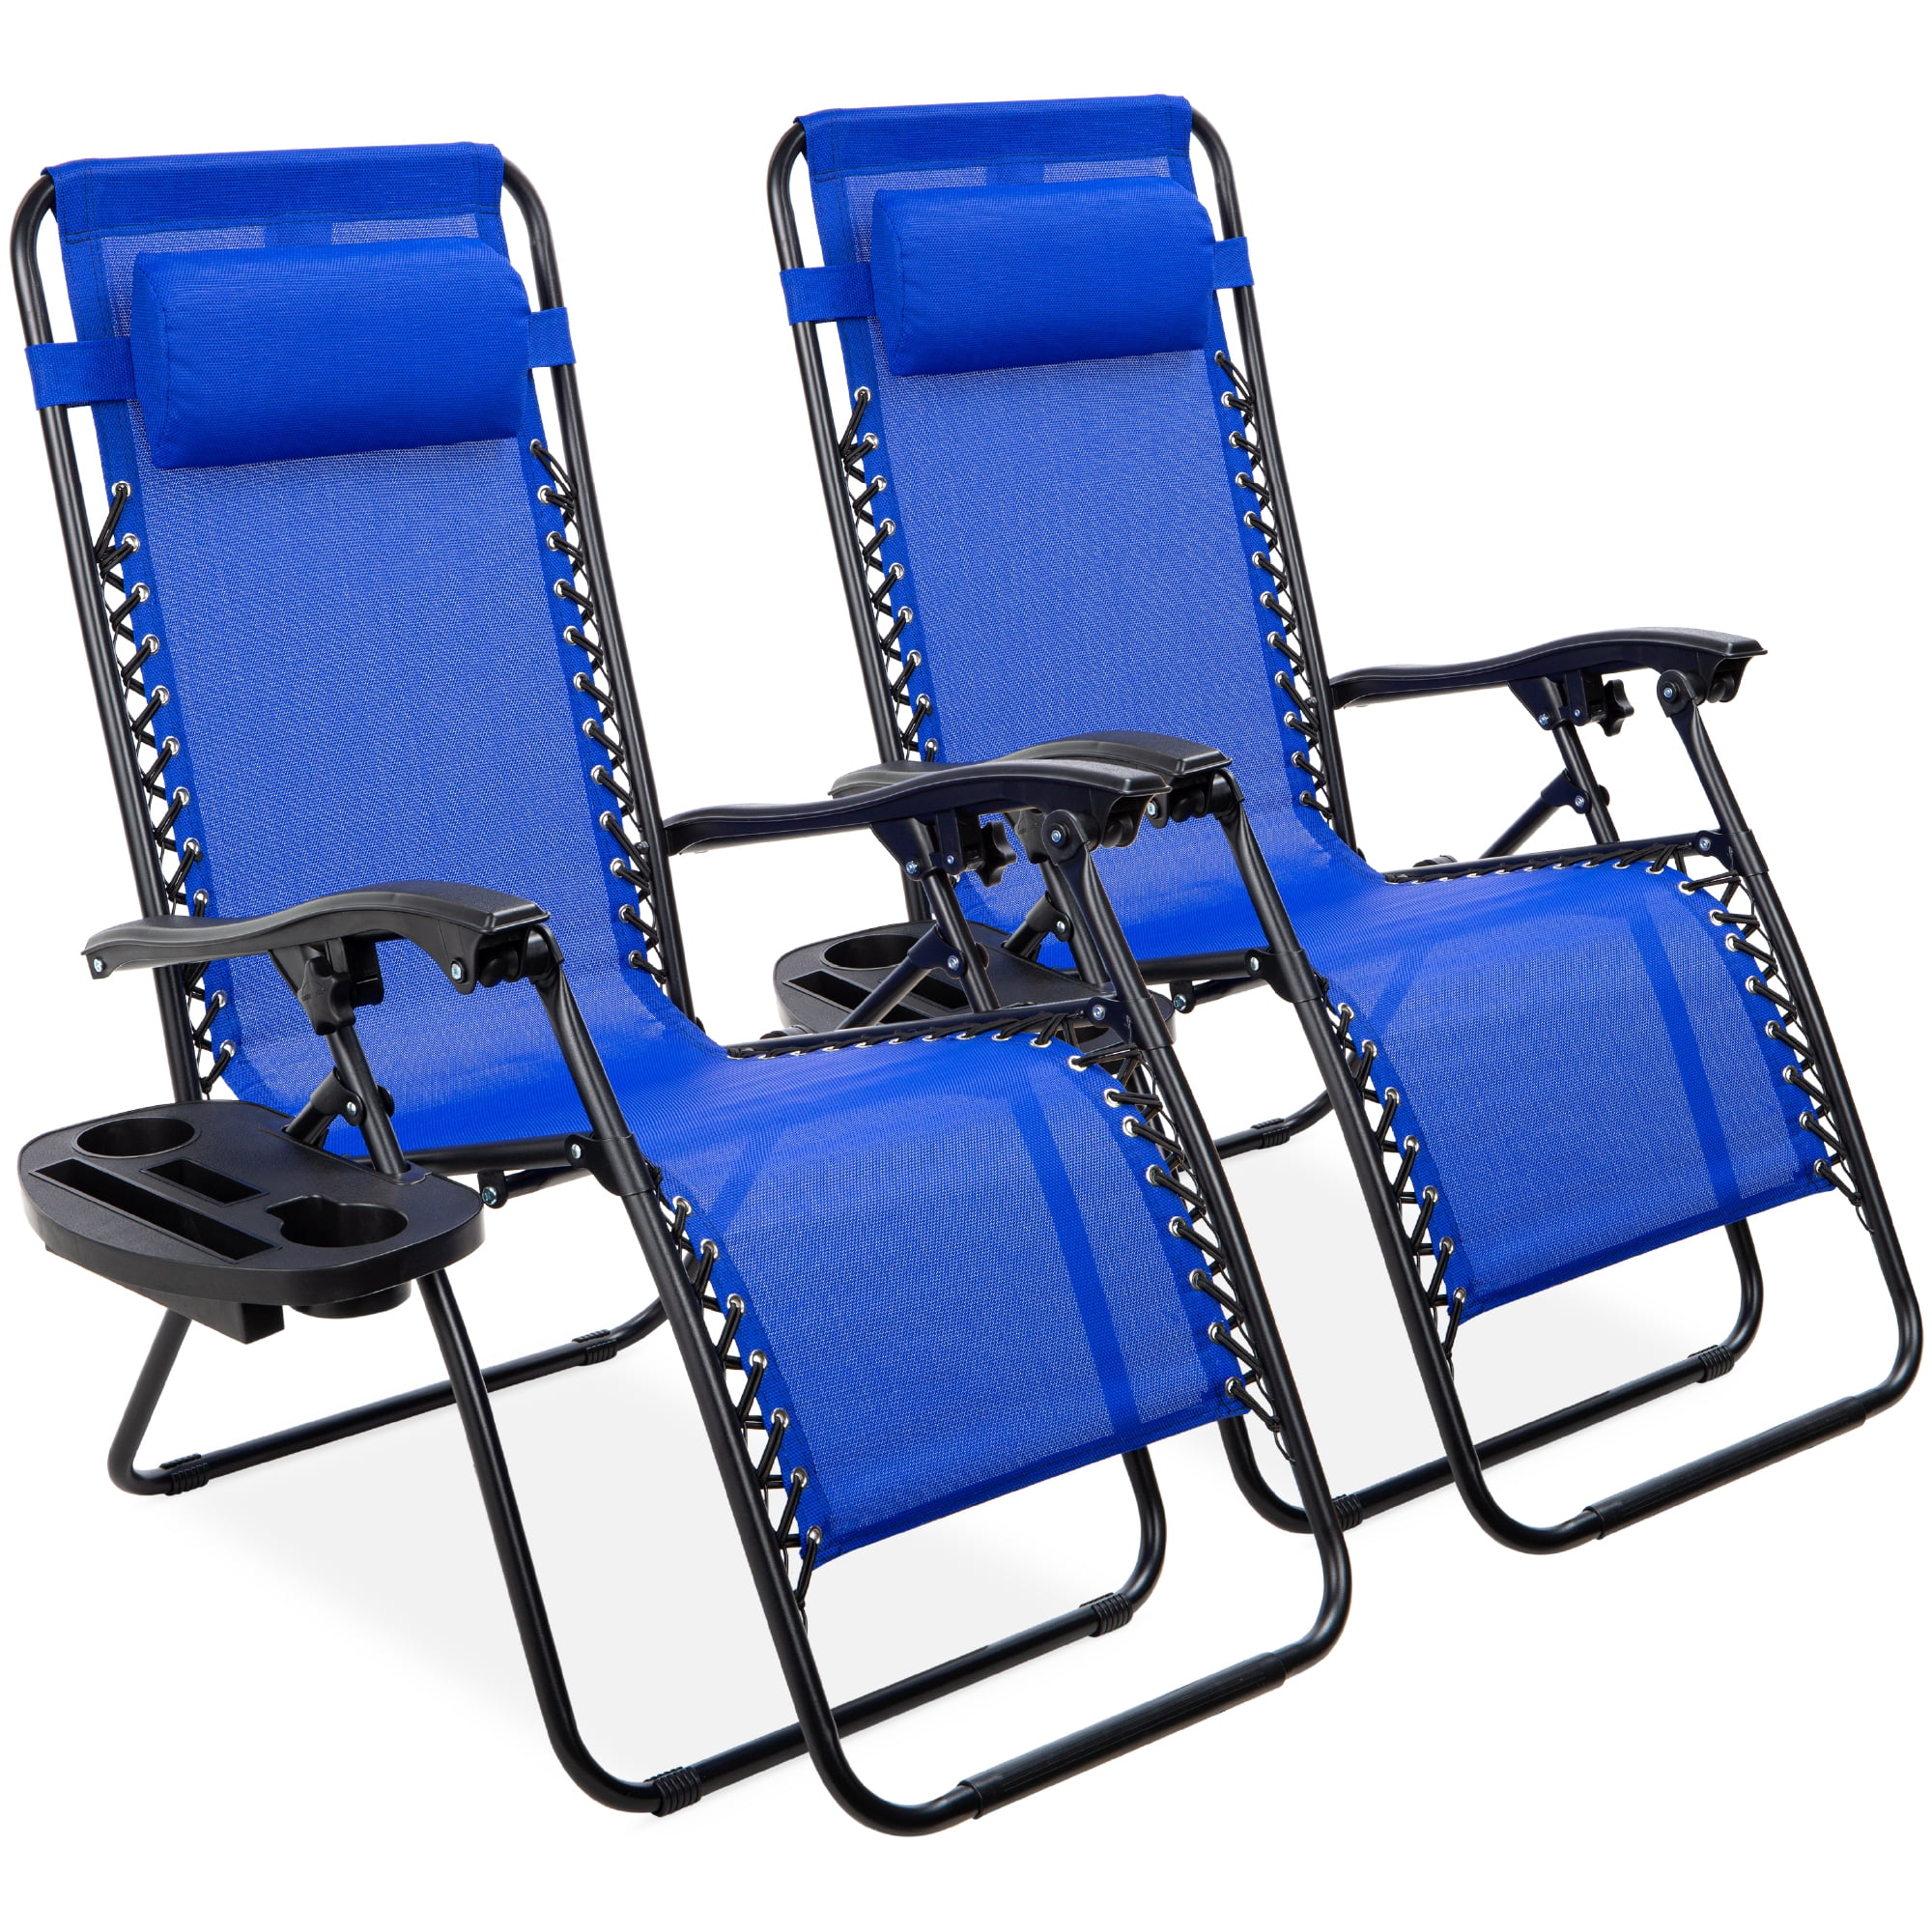 Zero Gravity Folding Lounge Chairs 2 Folding Table w/ Cup Holder Deluxe Set